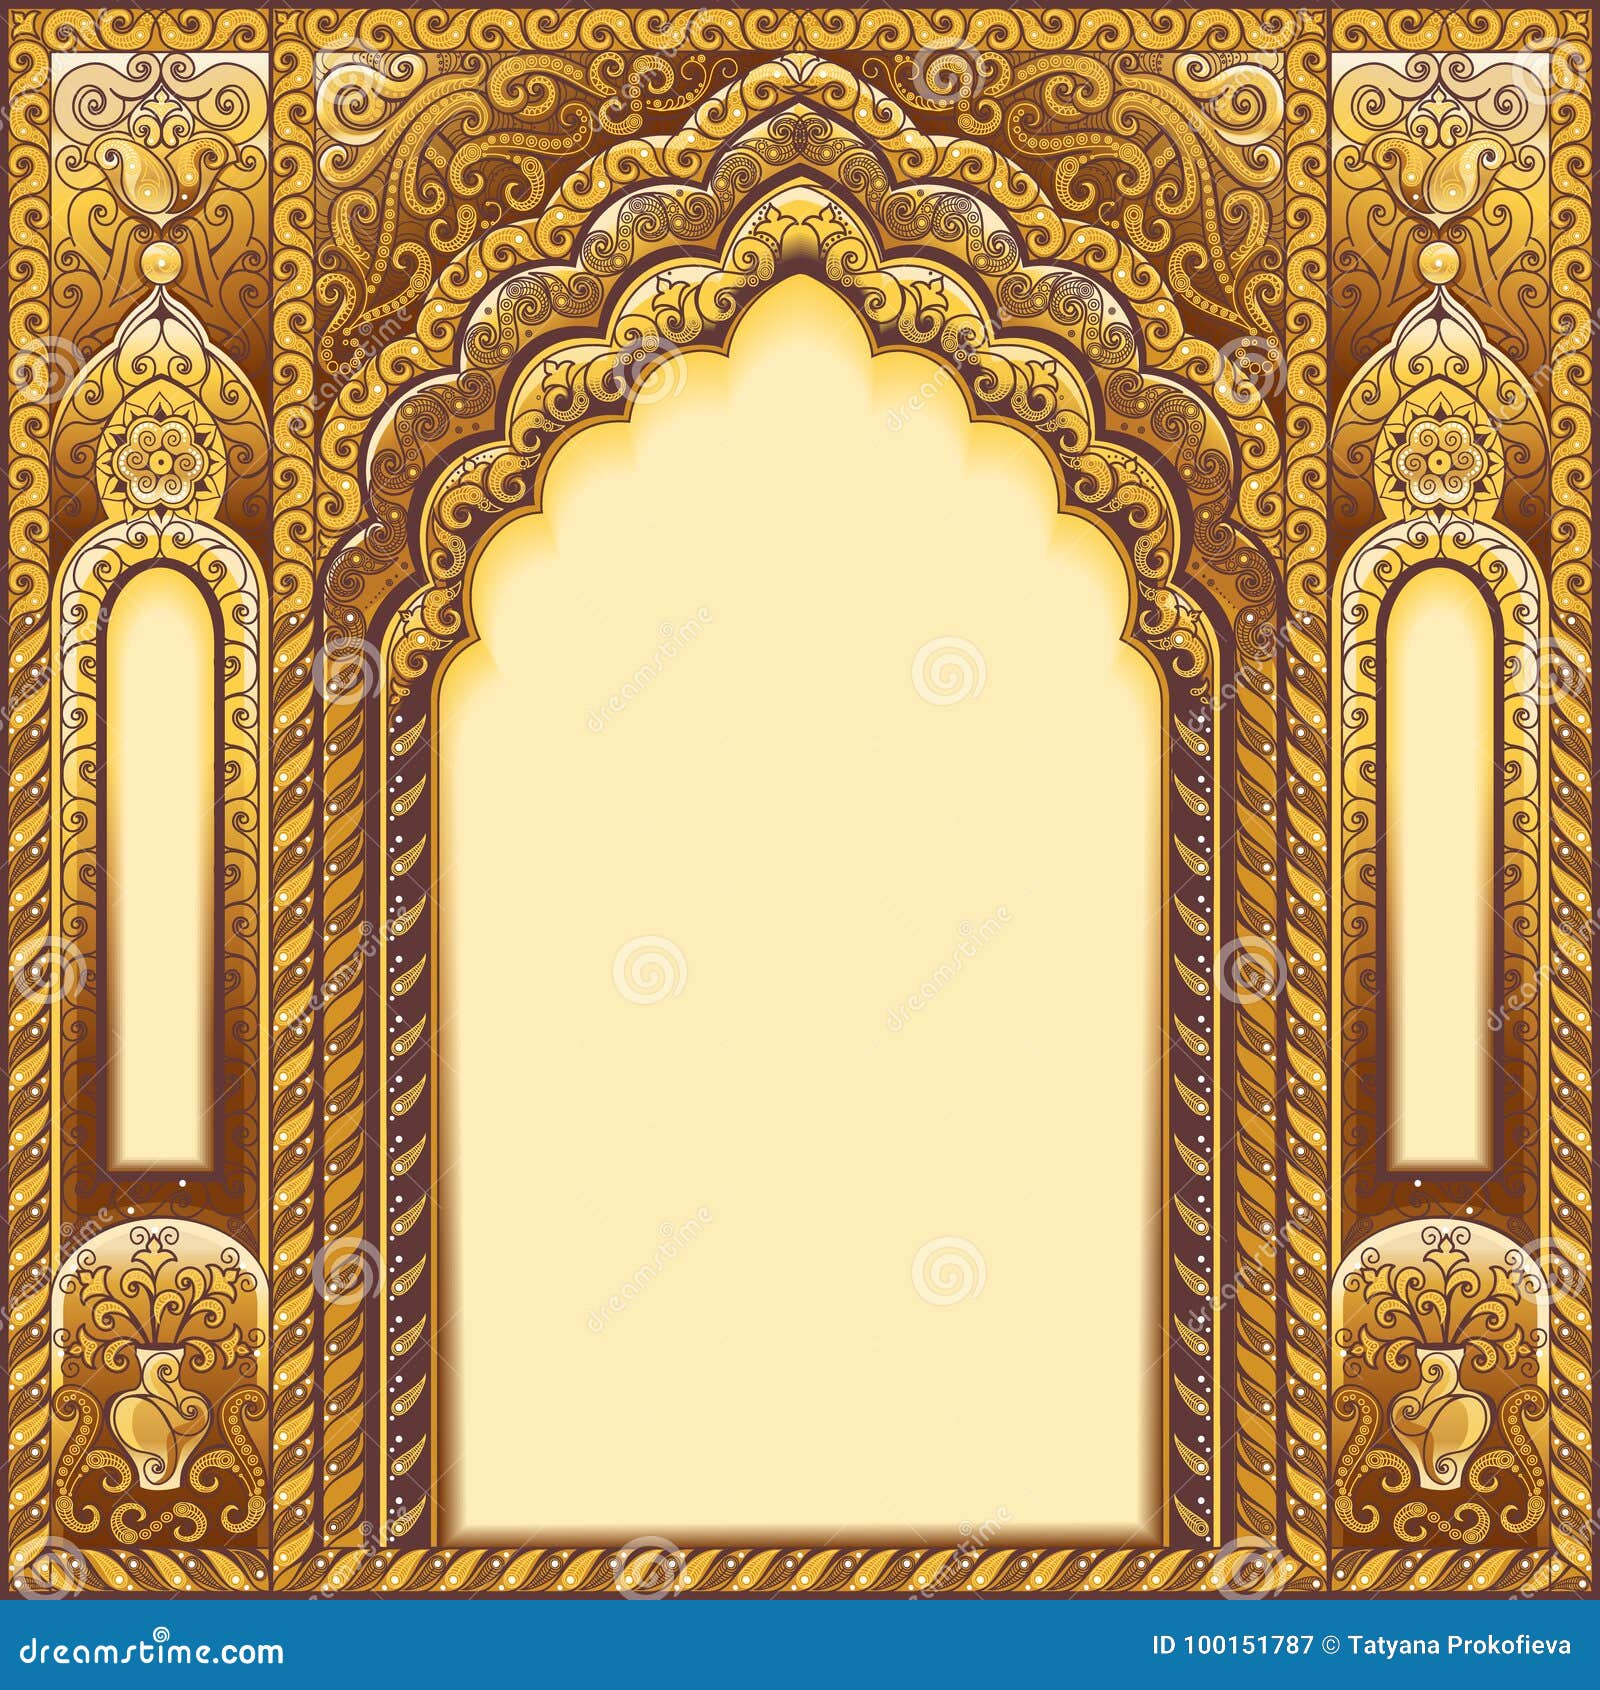 indian ornamented arch. color gold